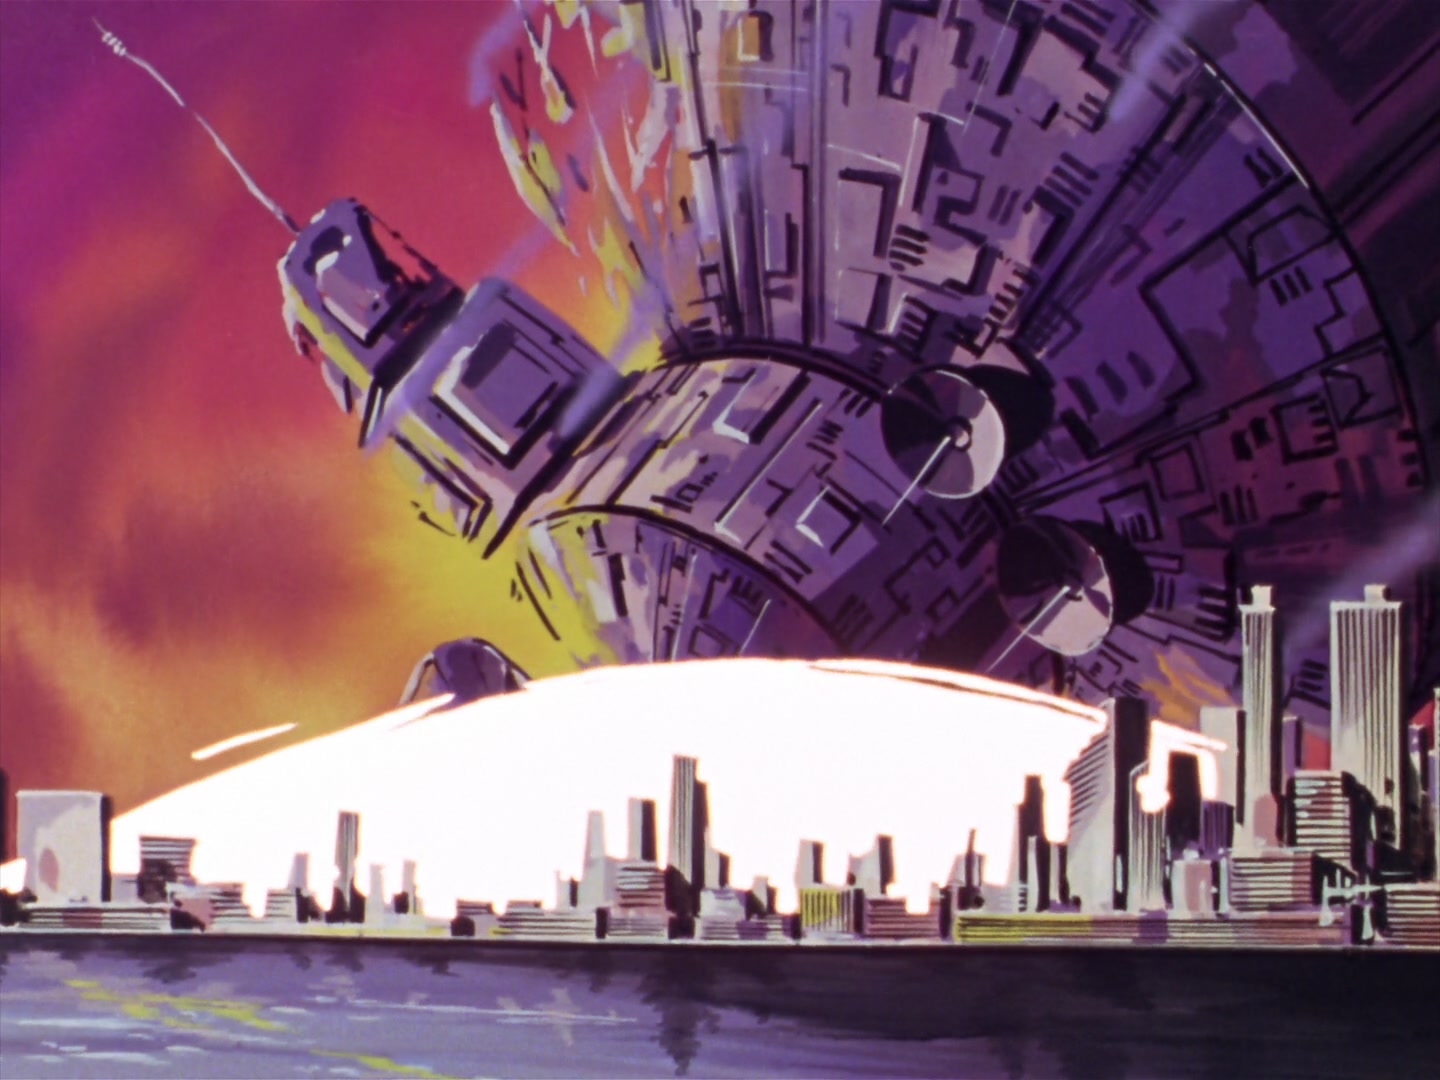 The Principality of Zeon unleashes their infamous colony drop in Mobile Suit Gundam: The Movie I (1981), Sunrise